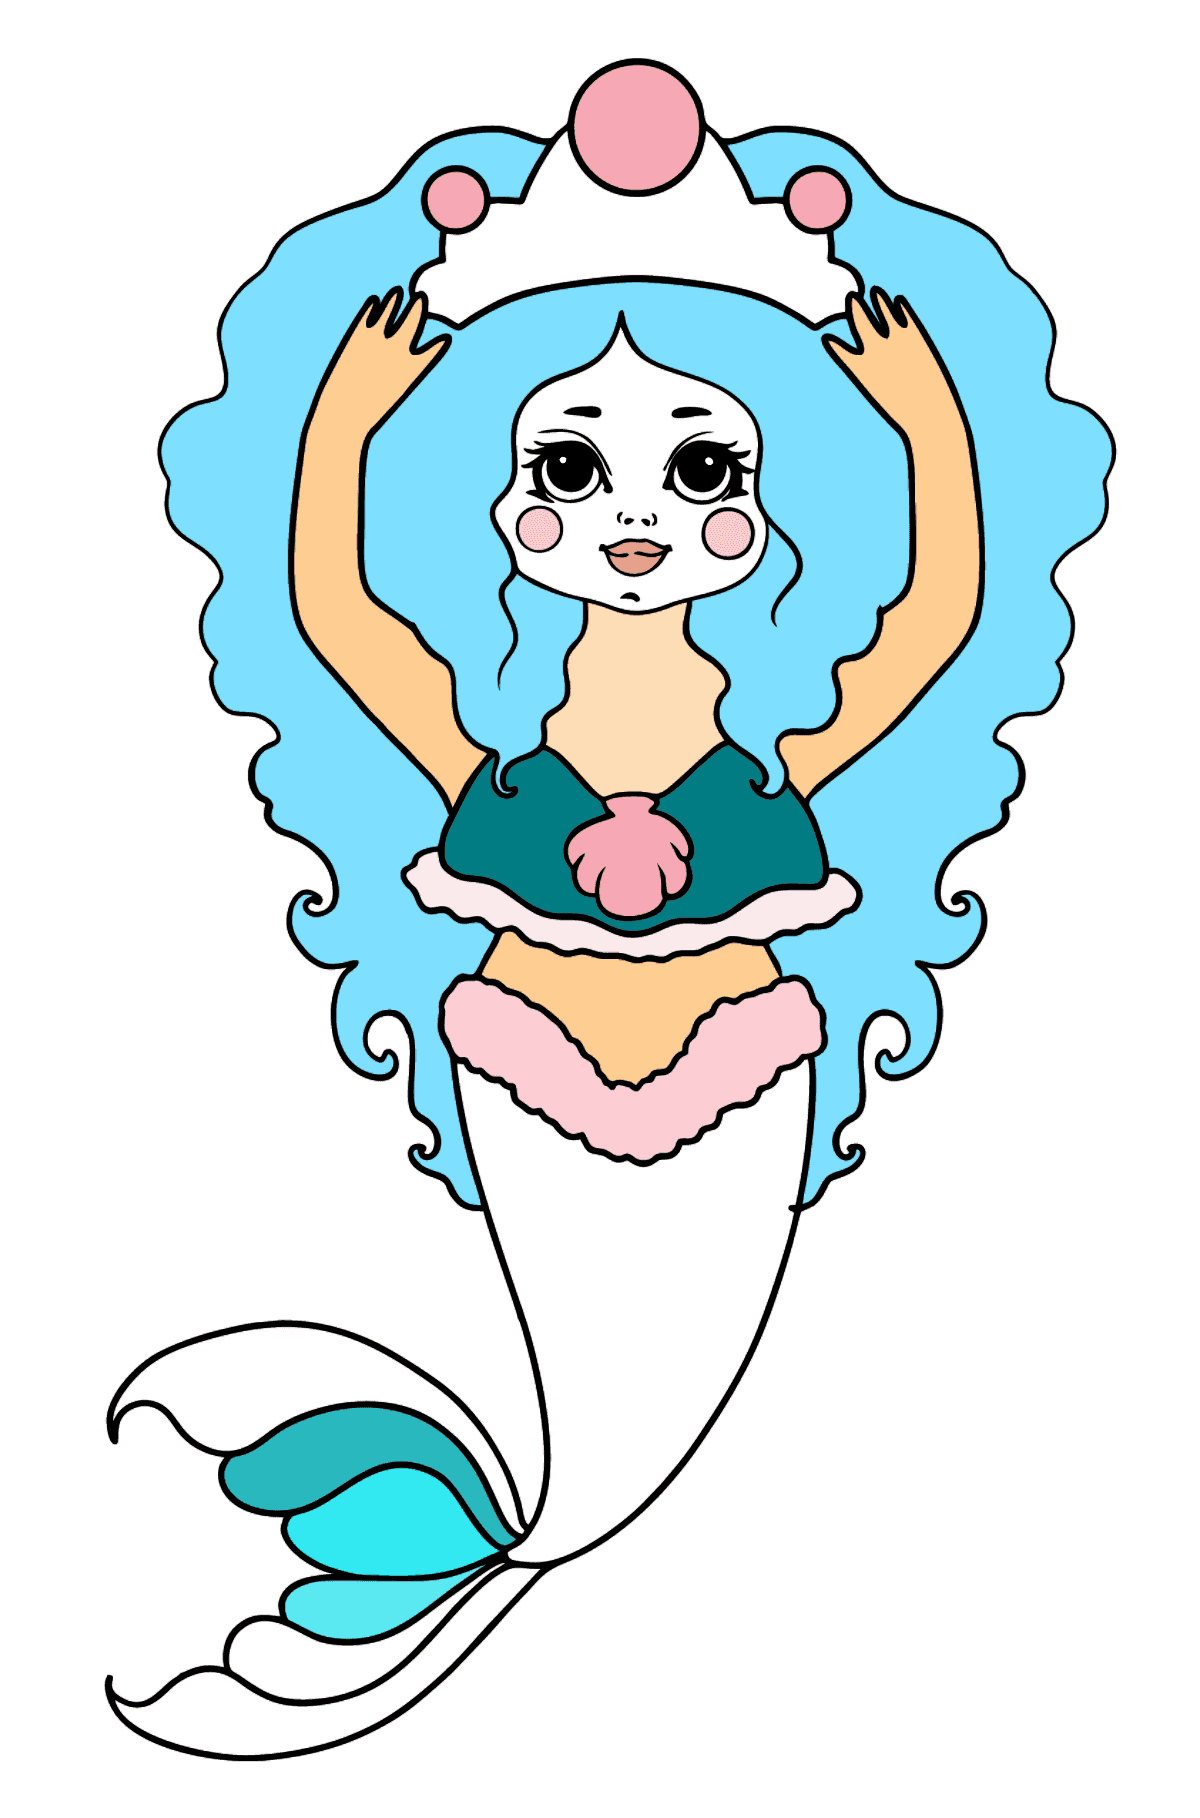 Mermaid with Blue Hair coloring page - Coloring Pages for Kids